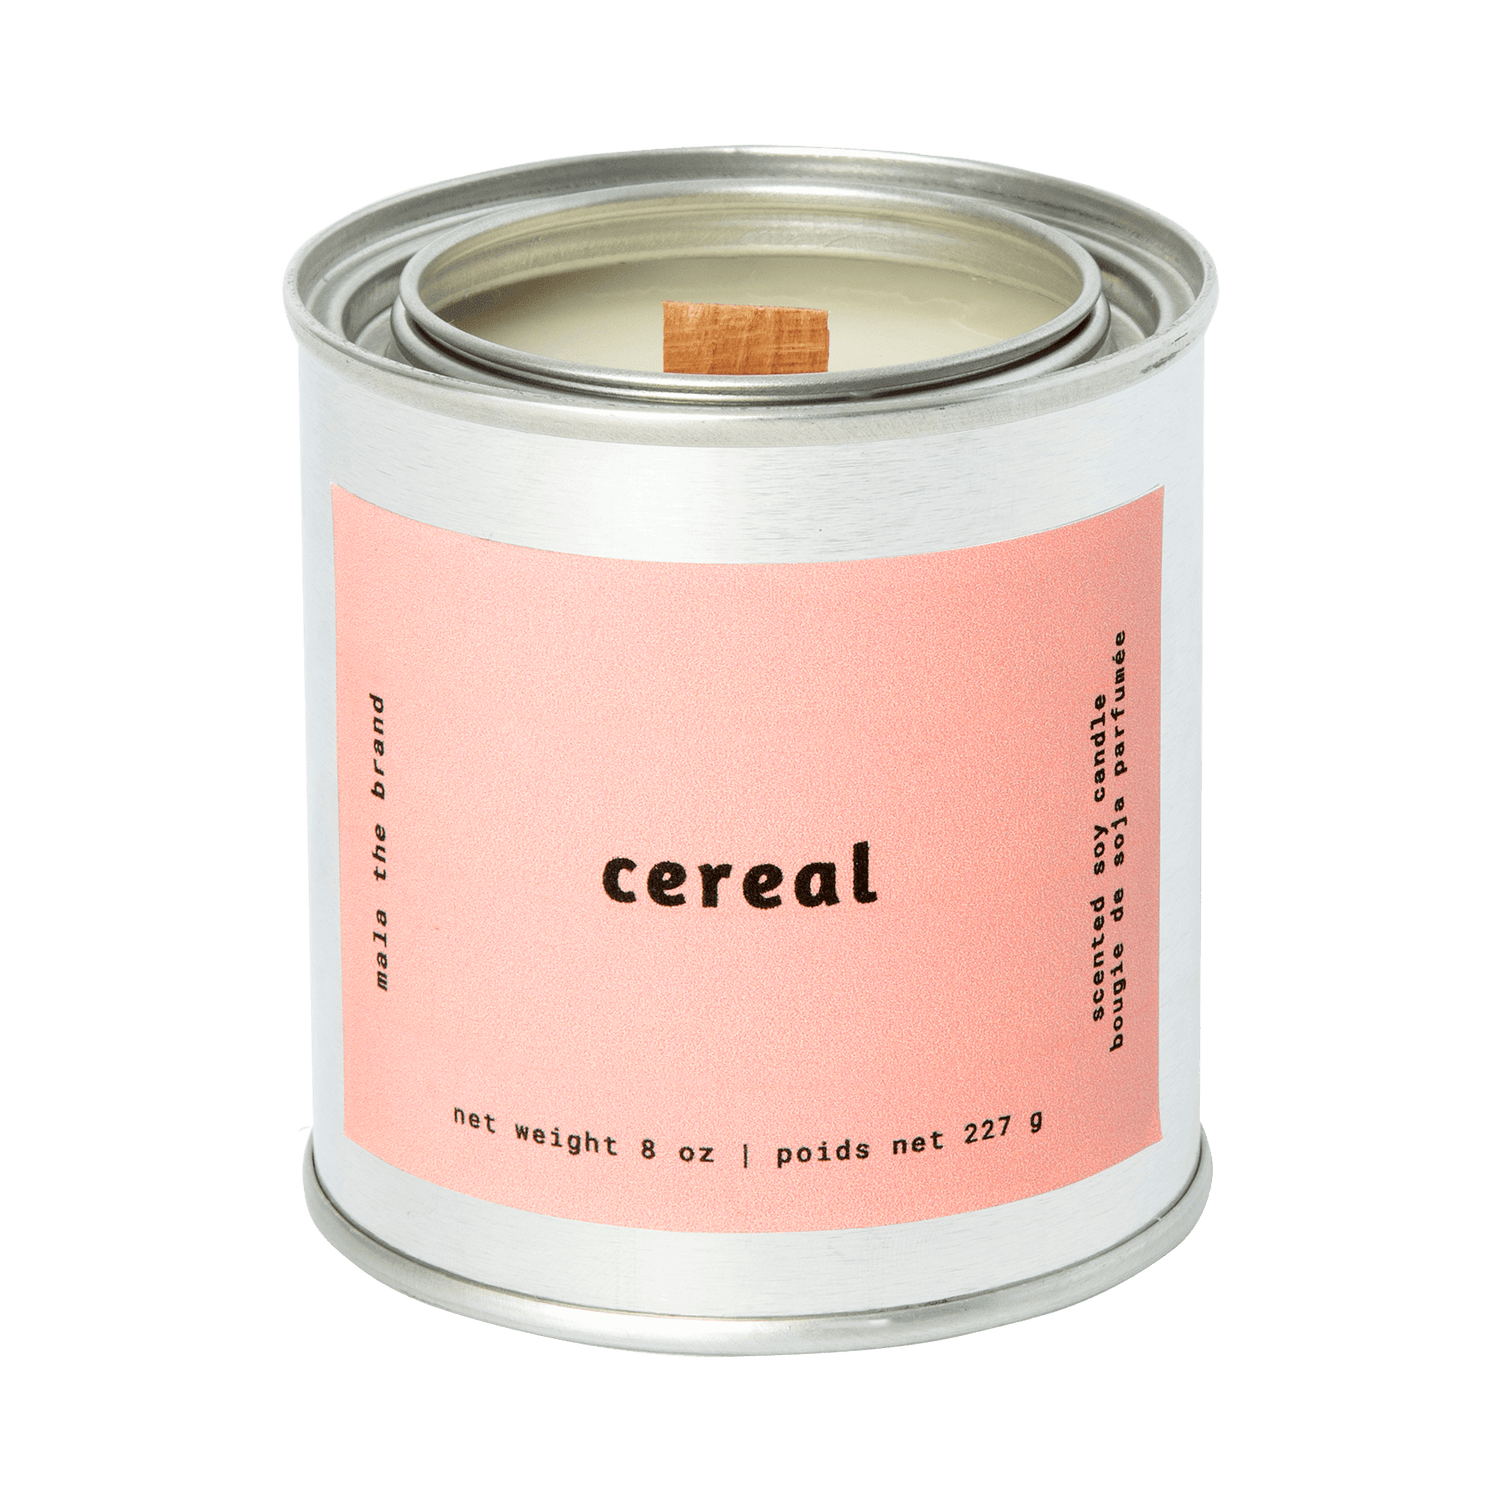 mala cereal candle